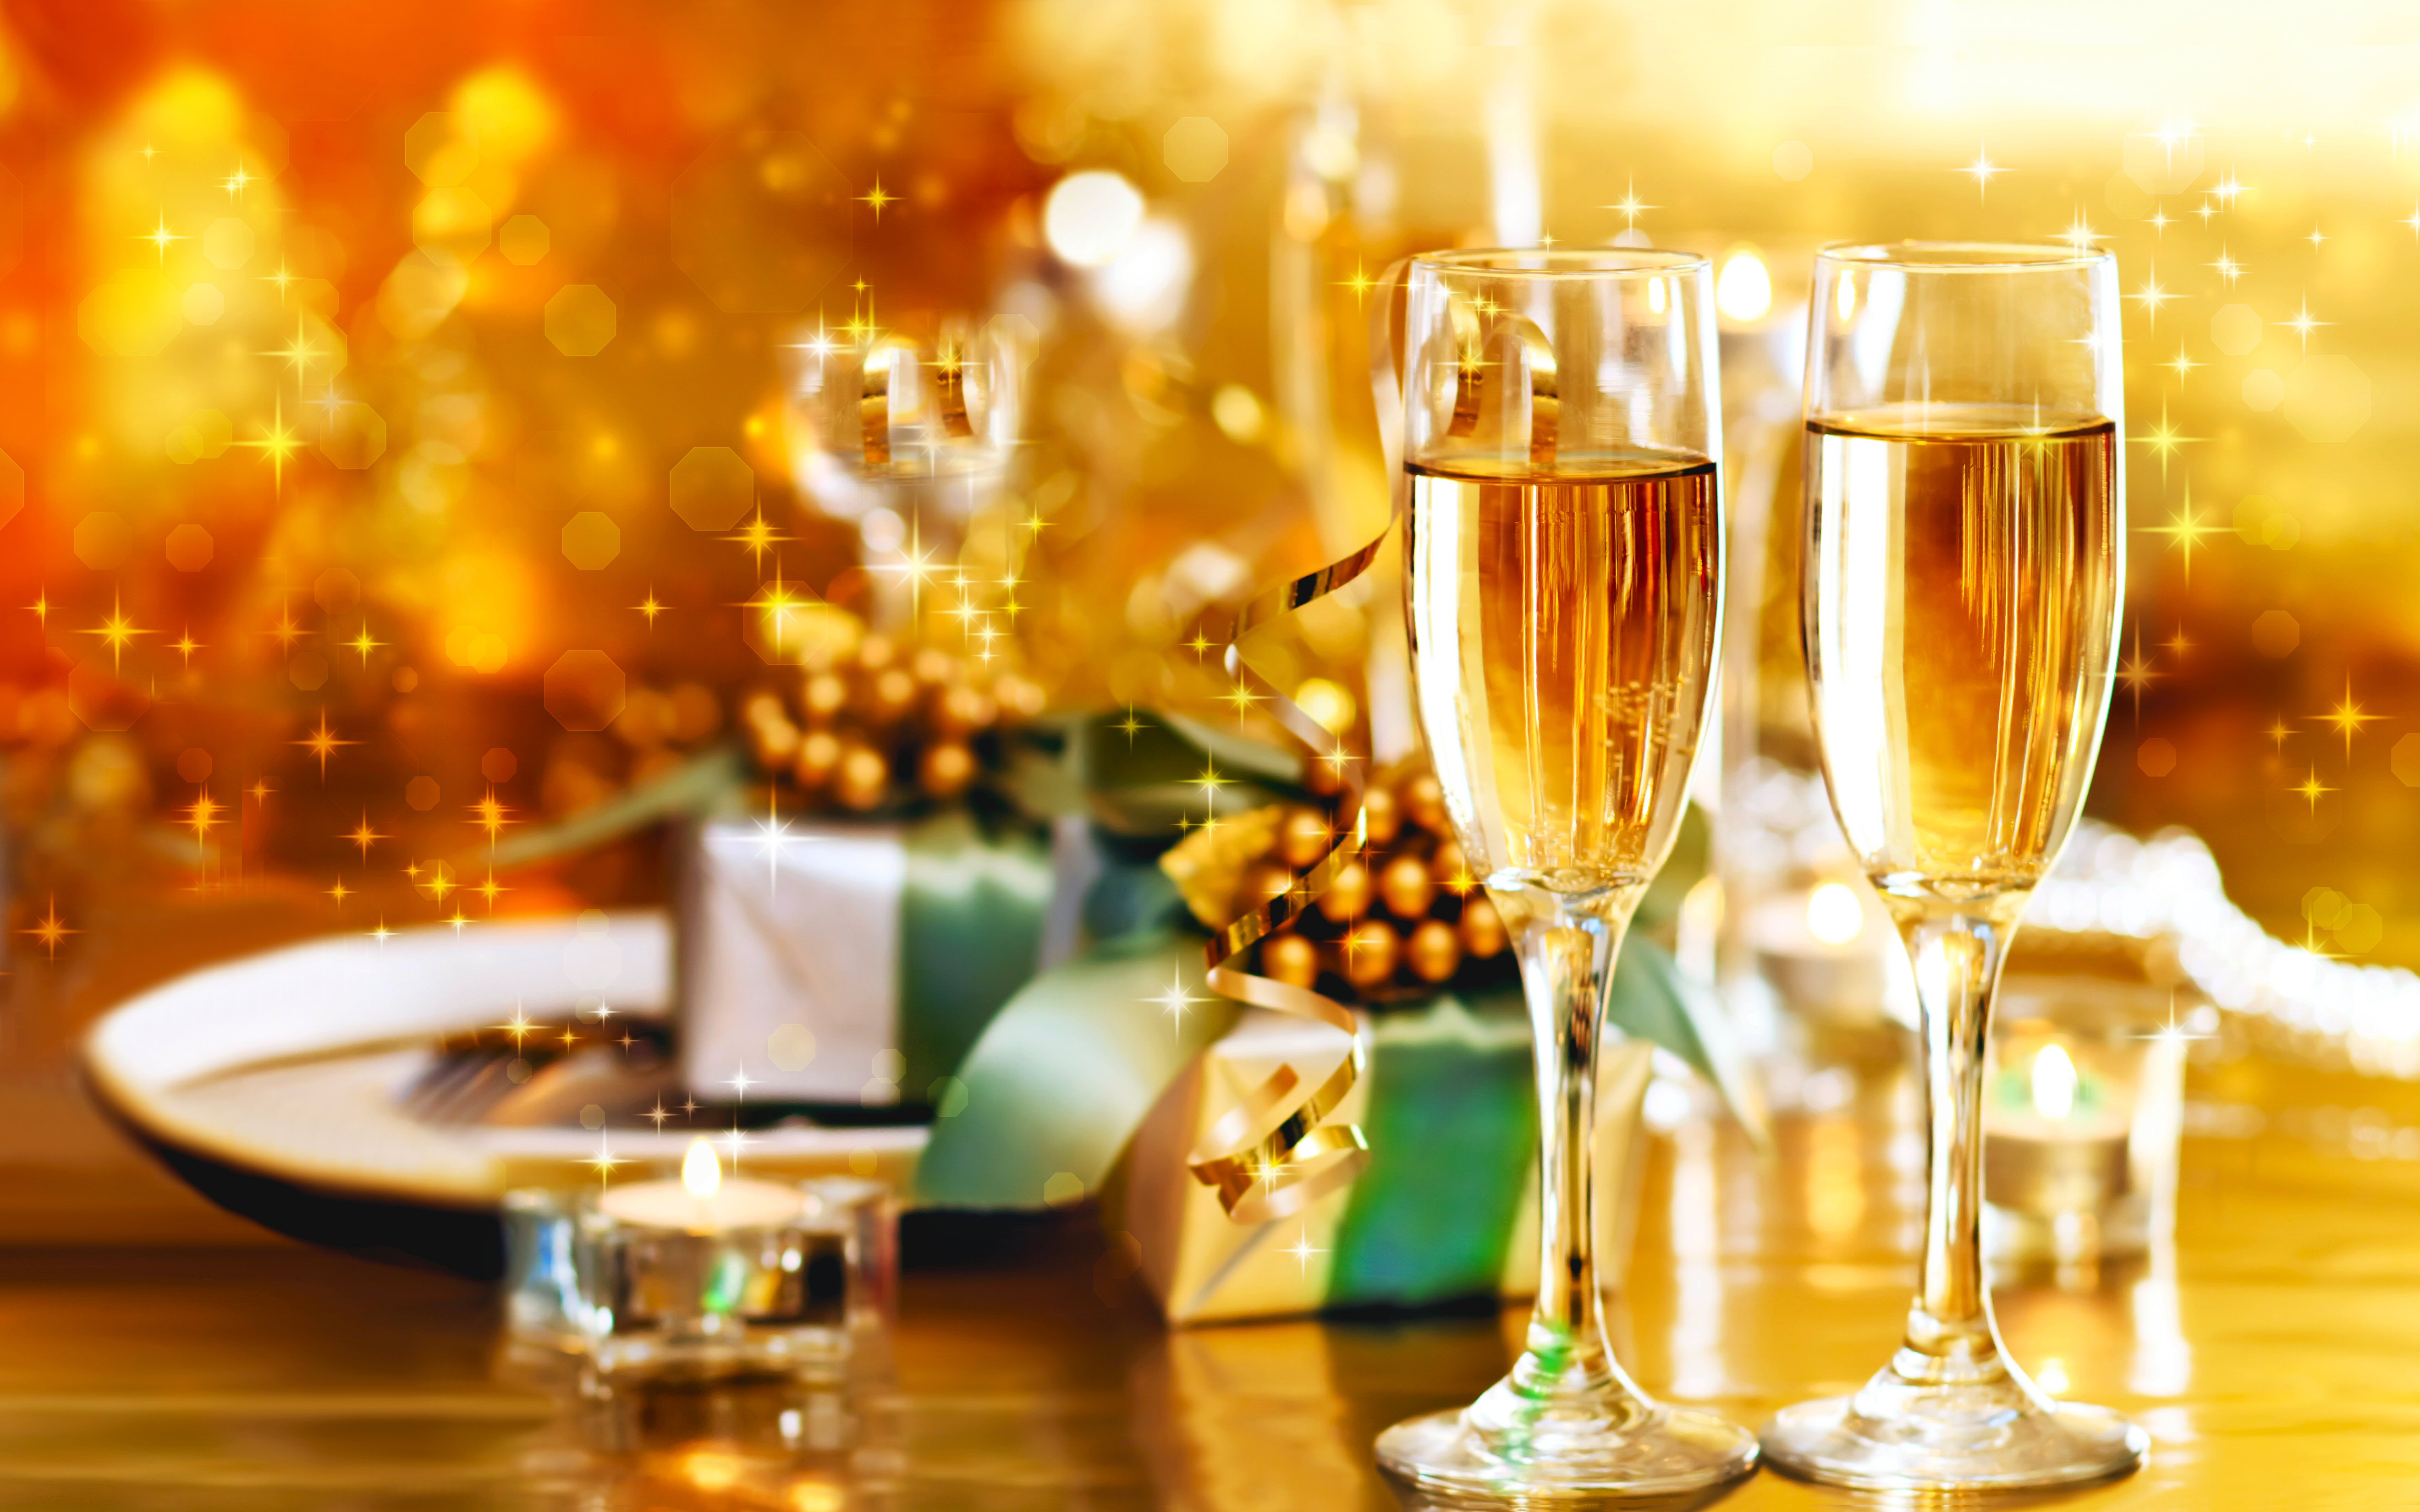 Happy New Year Champaign Glasses Gifts Wallpaper Search